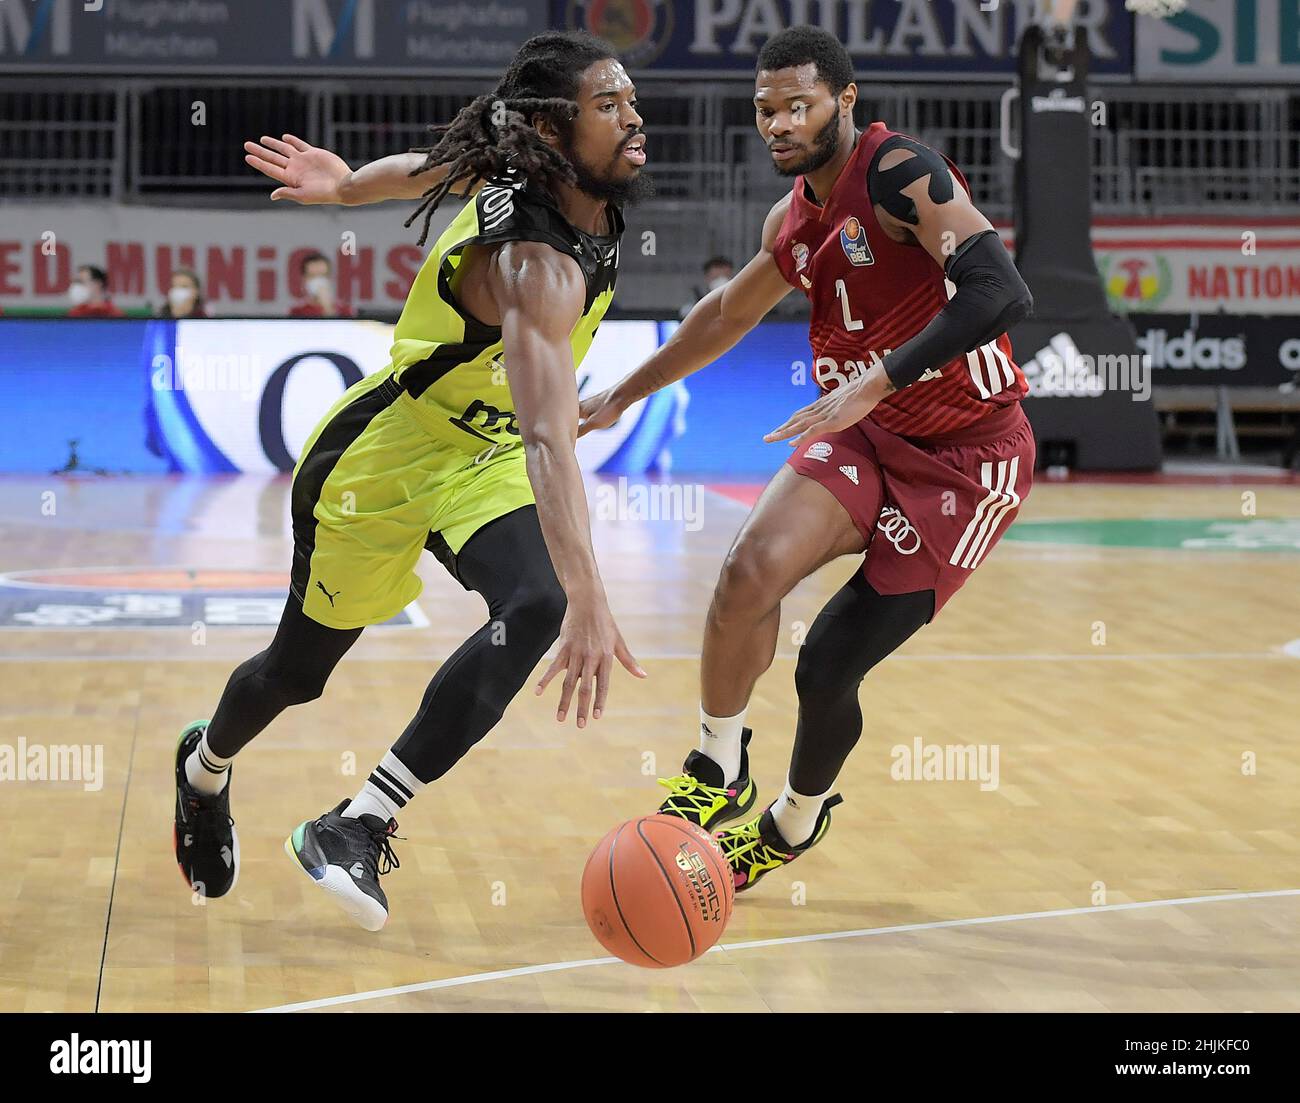 Muenchen, Deutschland (DE), 30 January, 2022. Pictured left to right, Marcus Thornton (medi Bayreuth), Corey Walden (FC Bayern Basketball) at the Basketball BBL Bundesliga, FC Bayern Muenchen Basketball - medi Bayreuth. Credit: Eduard Martin/Alamy Live News Stock Photo